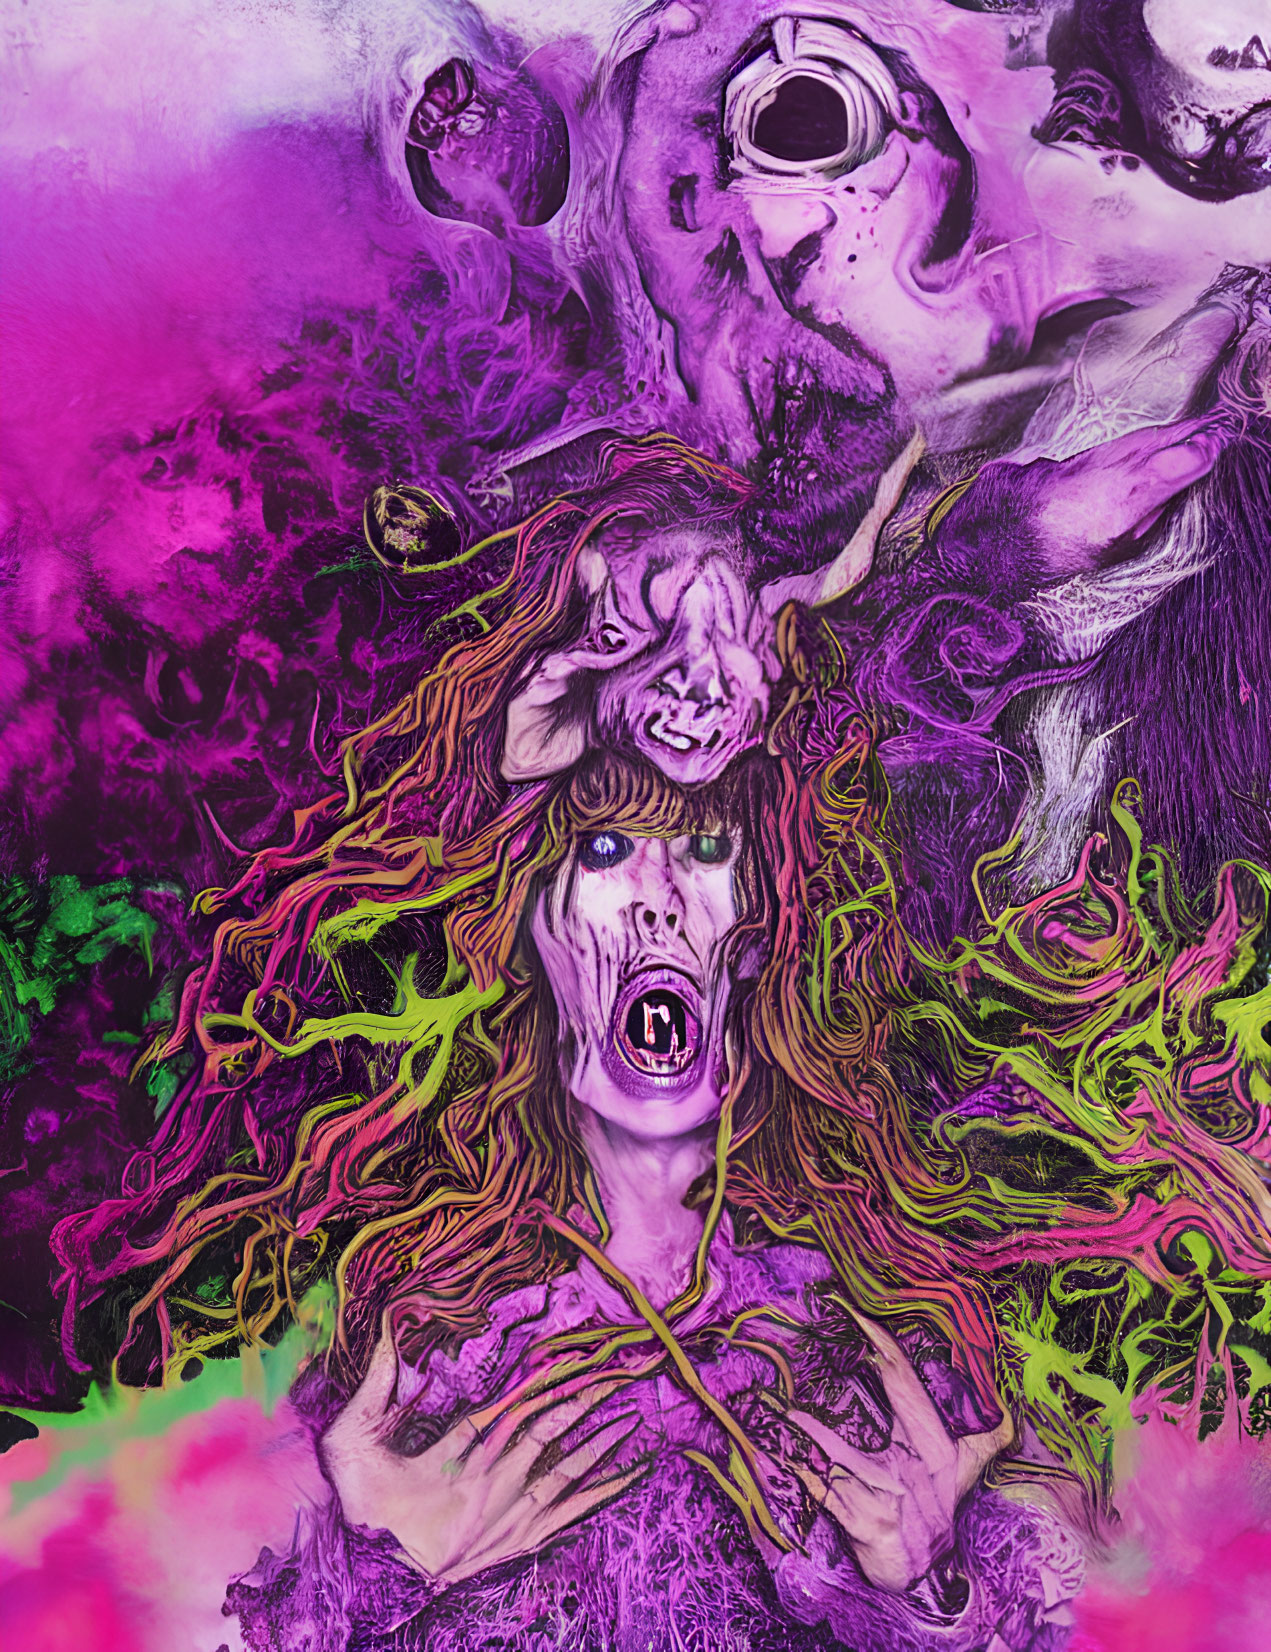 Colorful surreal illustration of screaming figure with flowing hair and abstract shapes